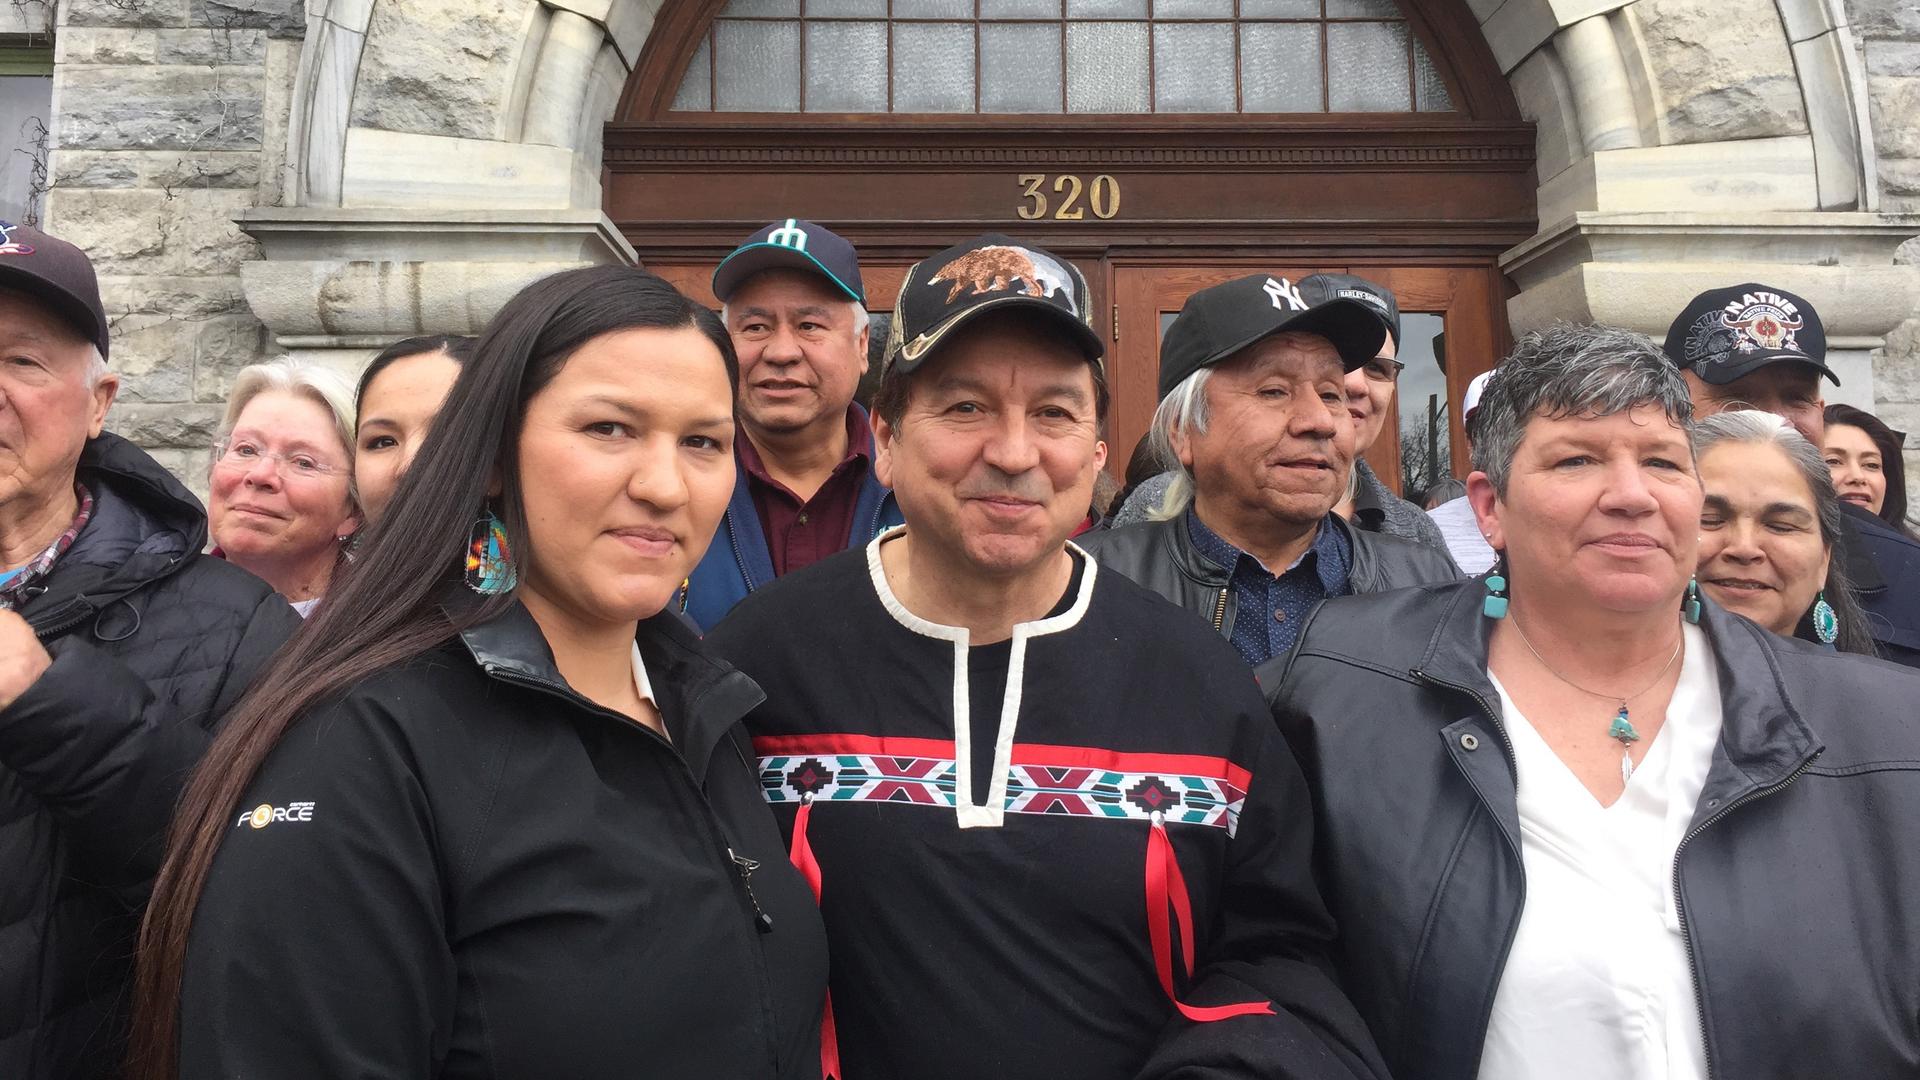 Rick Desautel, flanked by his daughter and his wife, Linda (right), celebrates his acquittal of illegal hunting charges outside the provincial courthouse in Nelson, British Columbia, in March 2017.